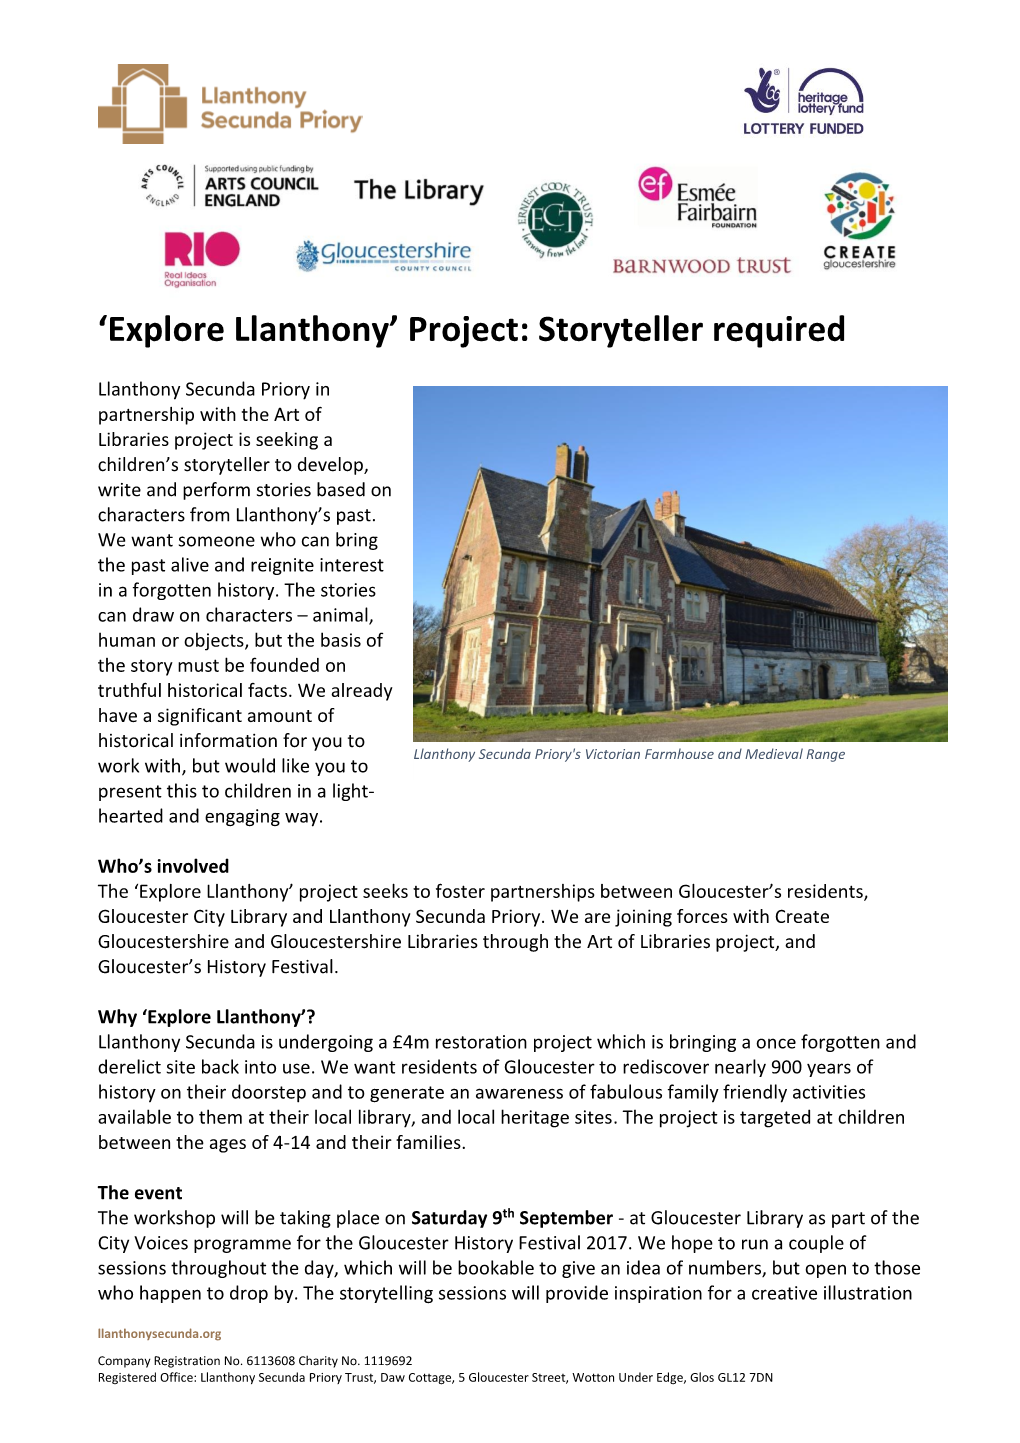 Explore Llanthony’ Project: Storyteller Required